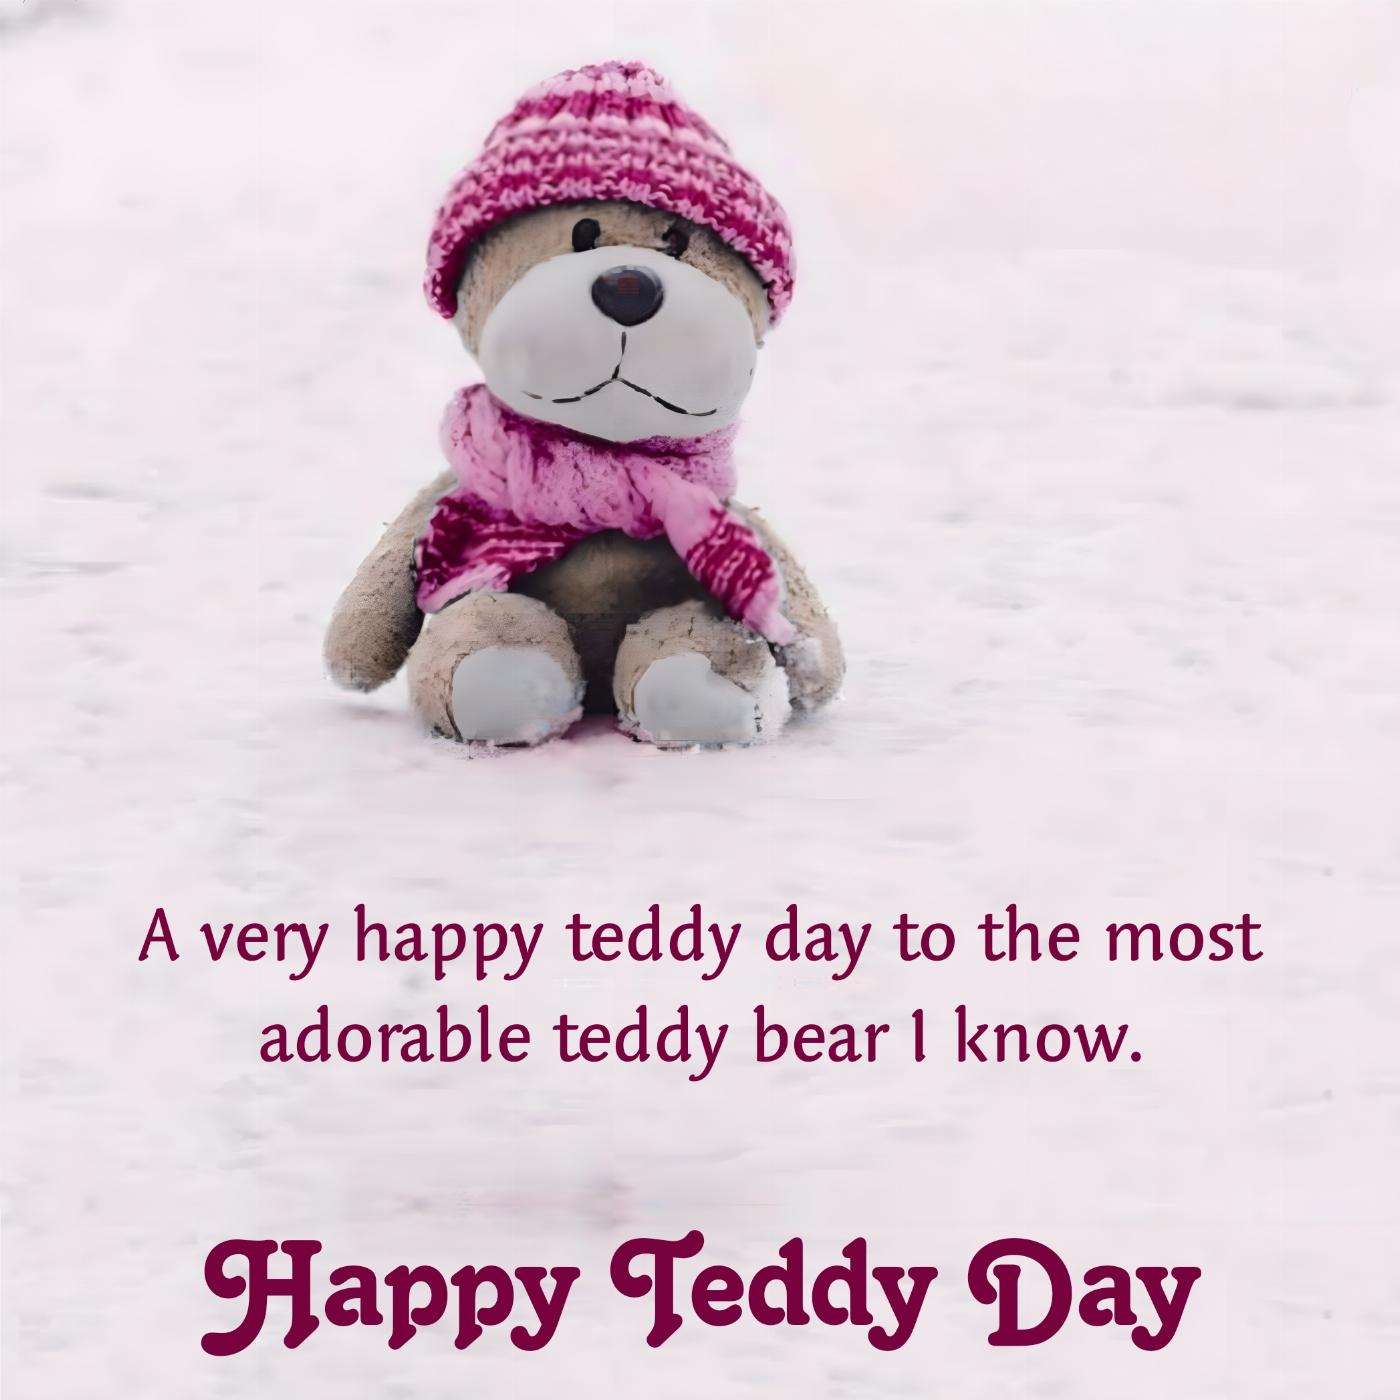 A very happy teddy day to the most adorable teddy bear I know